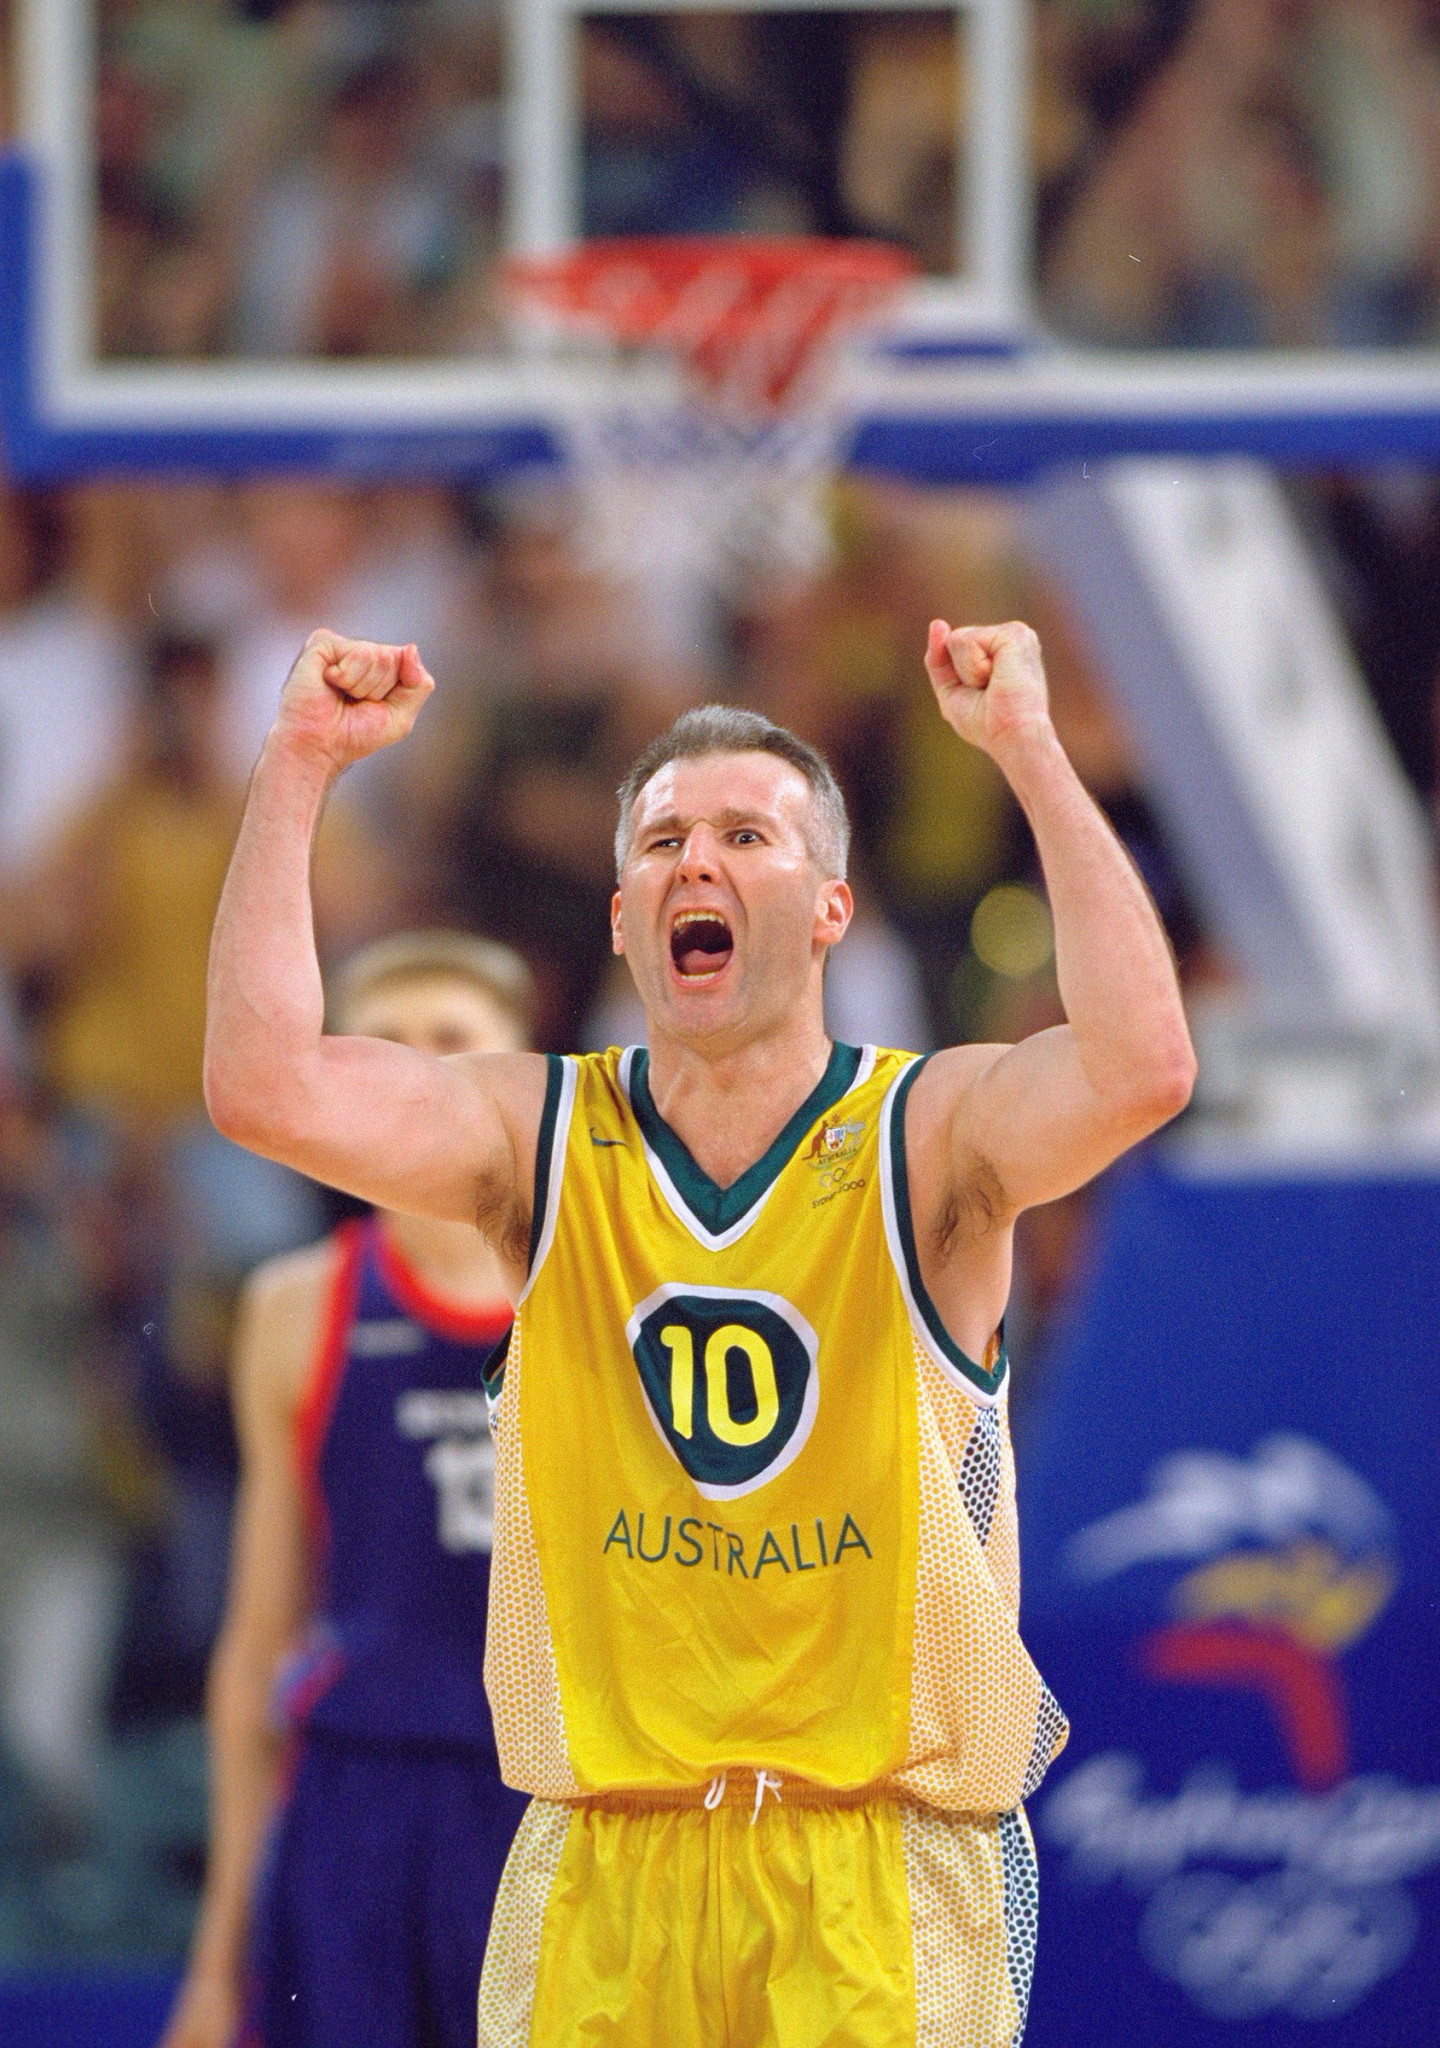 Andrew Gaze playing in his fifth Olympics at Sydney 2000 ©Getty Images